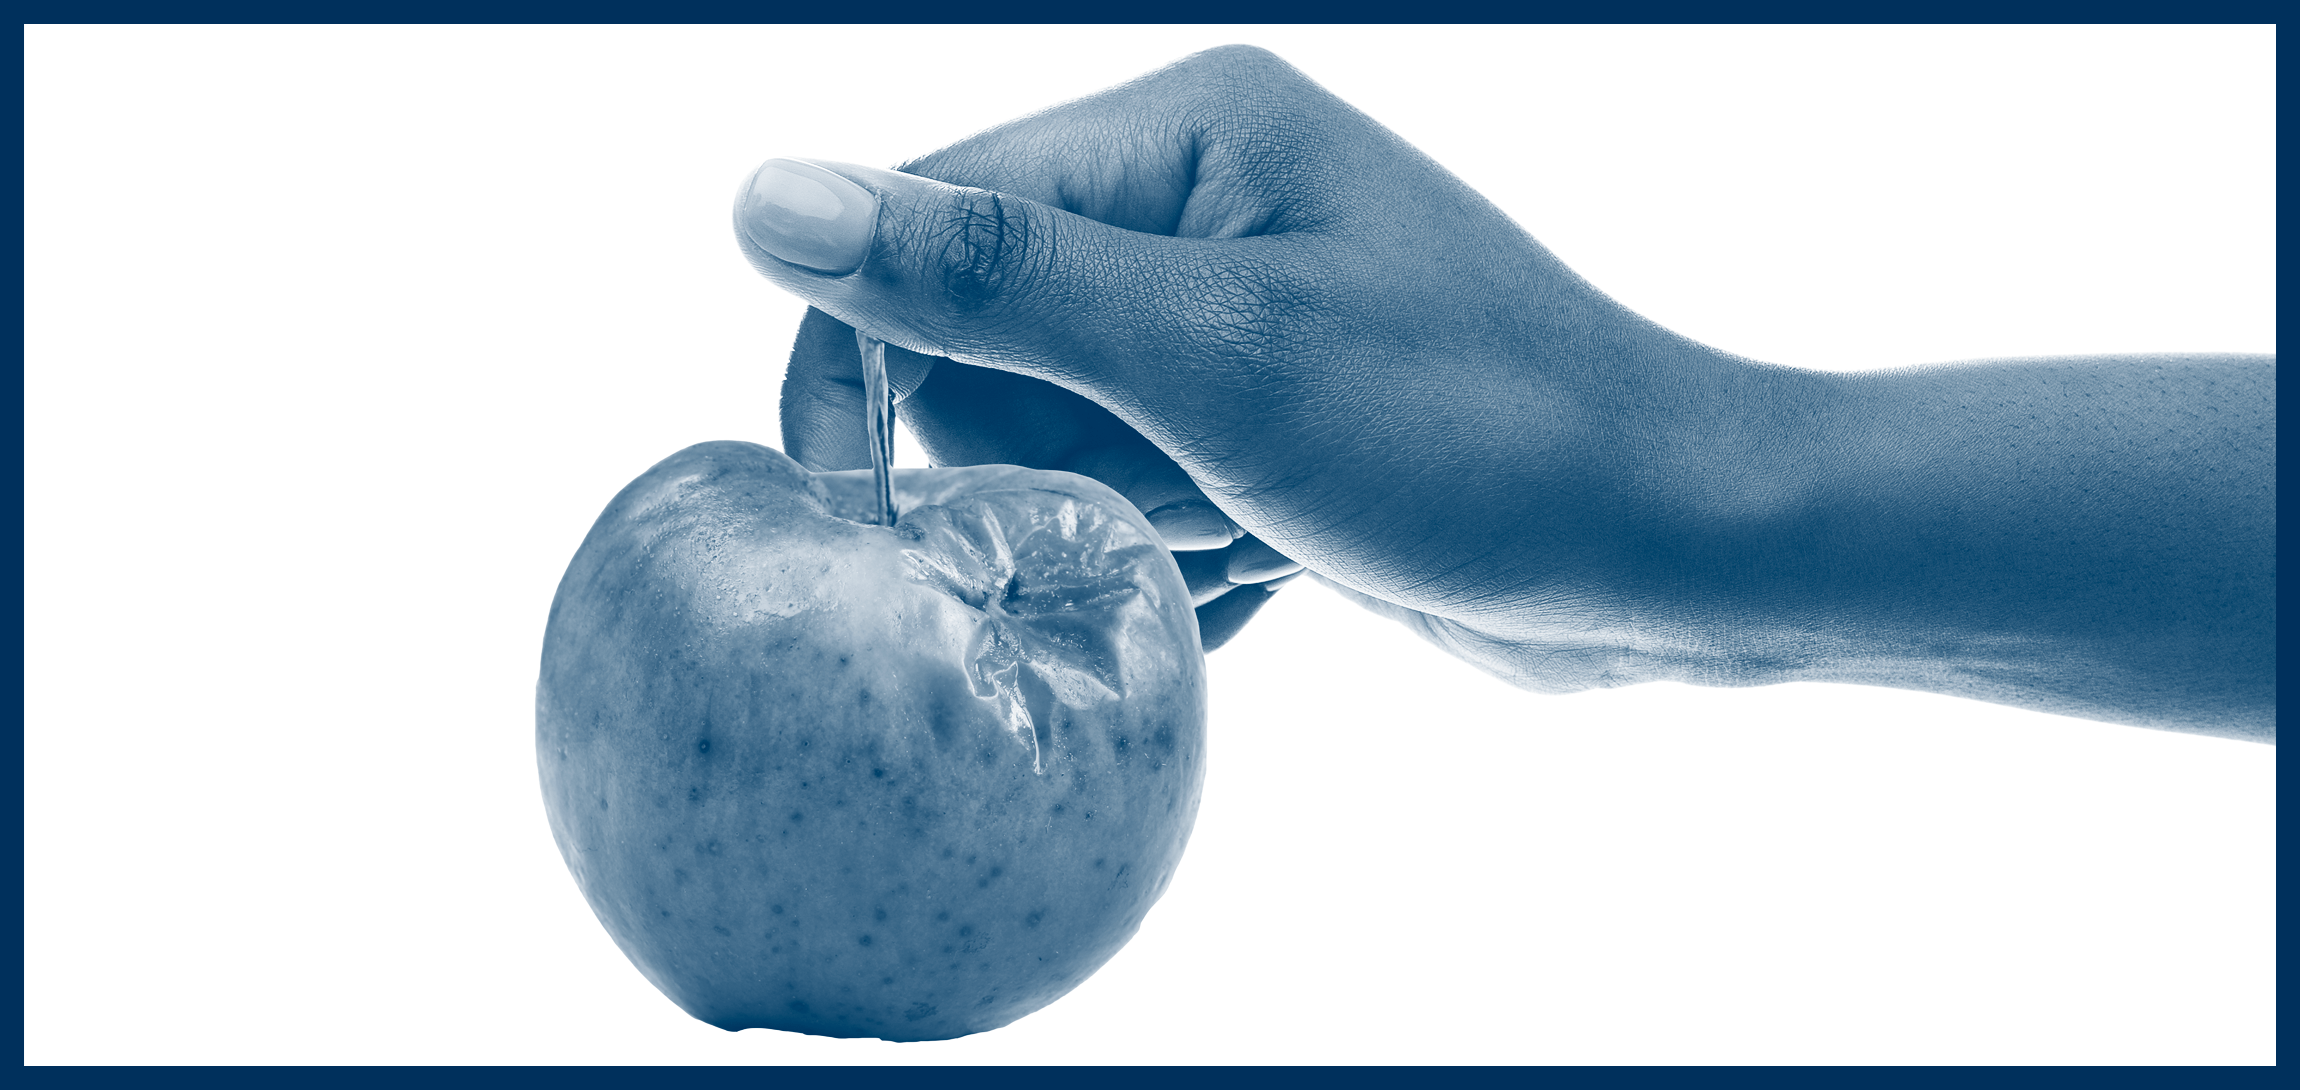 Image of a hand picking up a bad apple